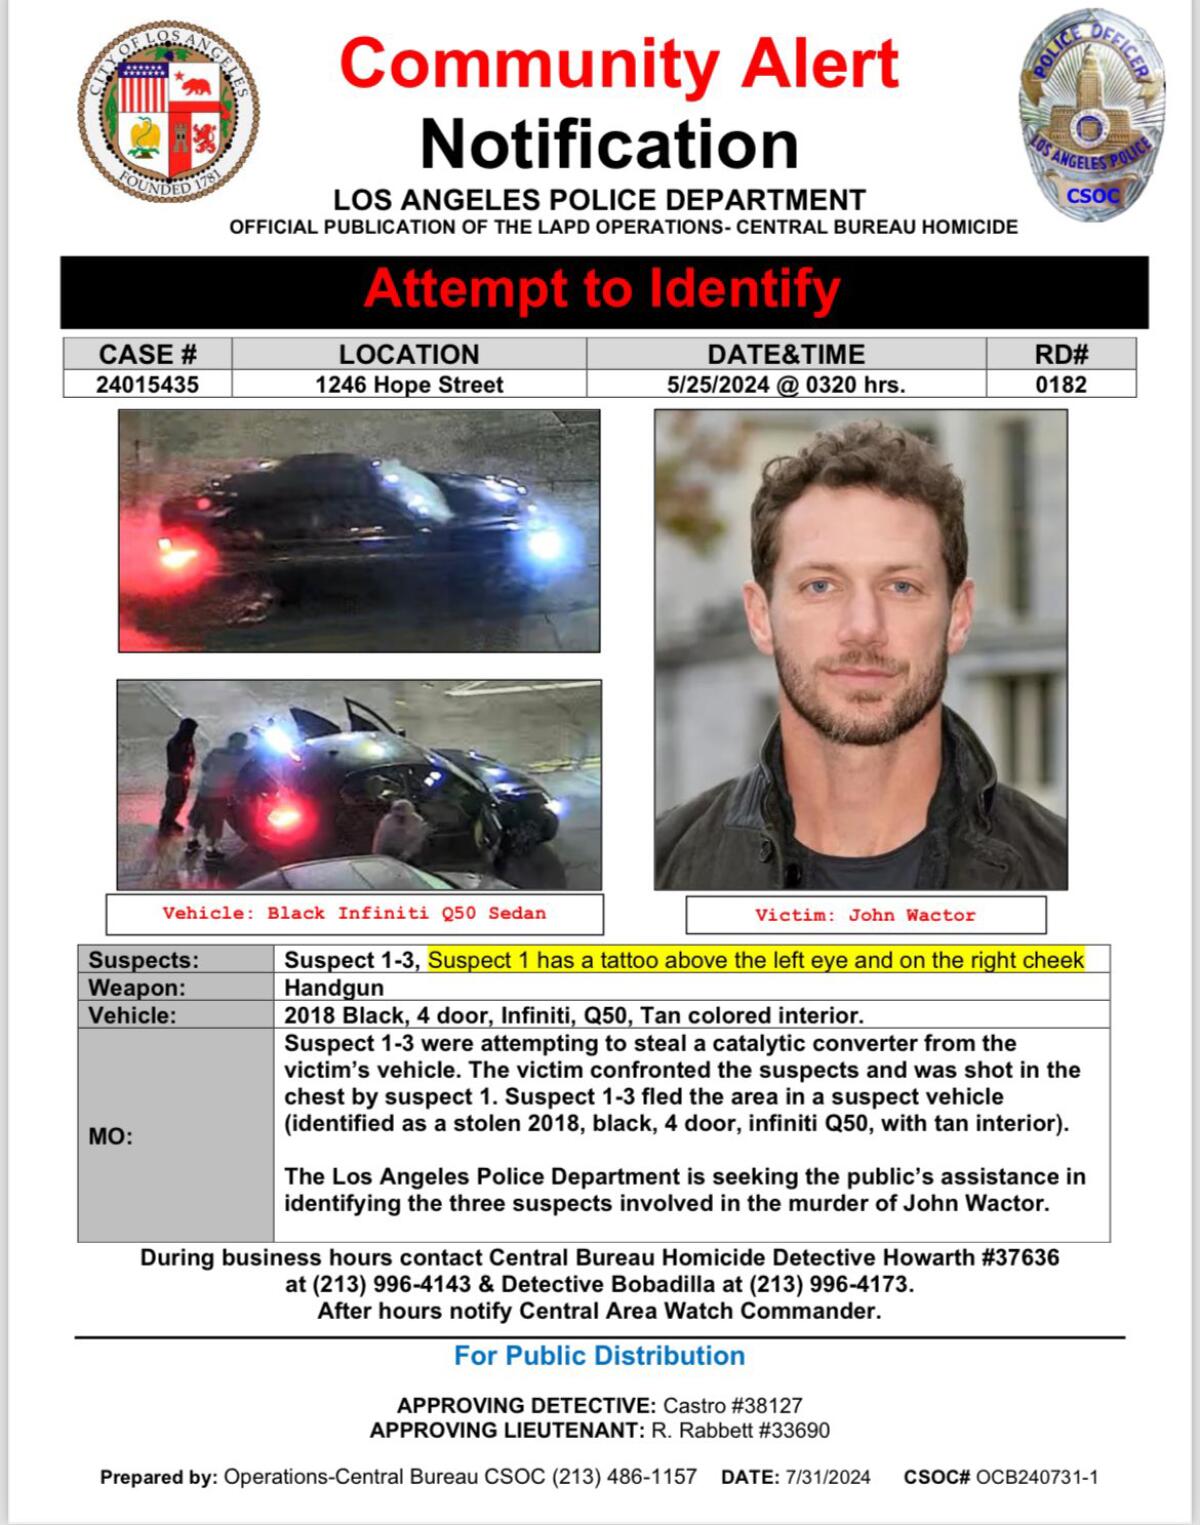 A community alert related to the homicide of actor Johnny Wactor.